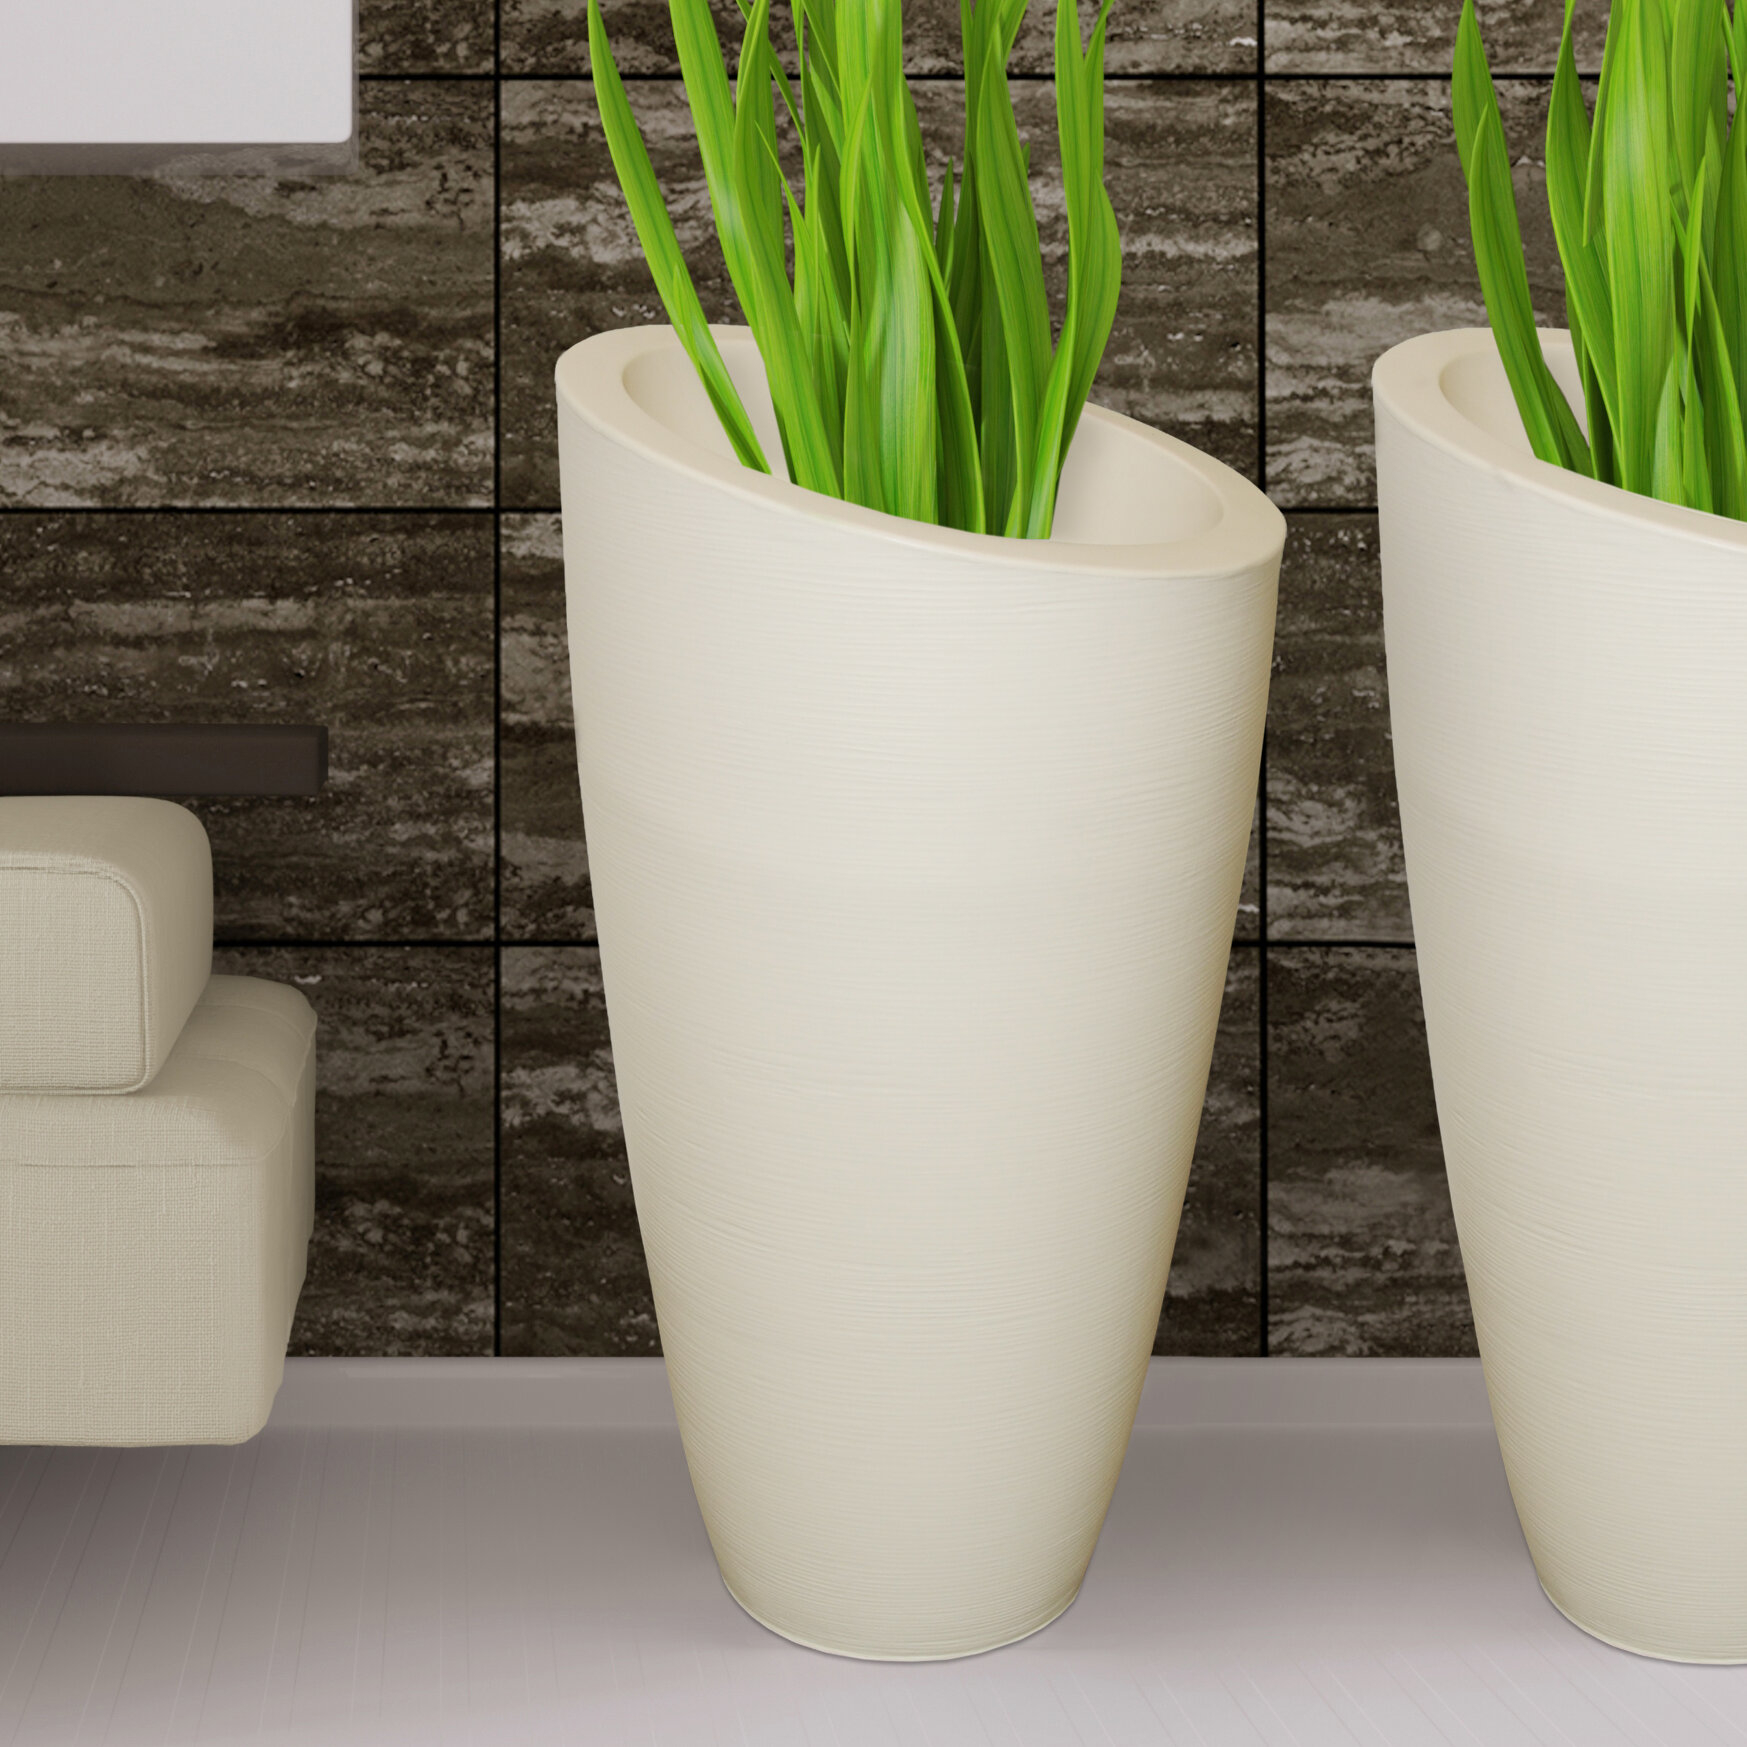 Plastic Pot Planter with Textured Finish